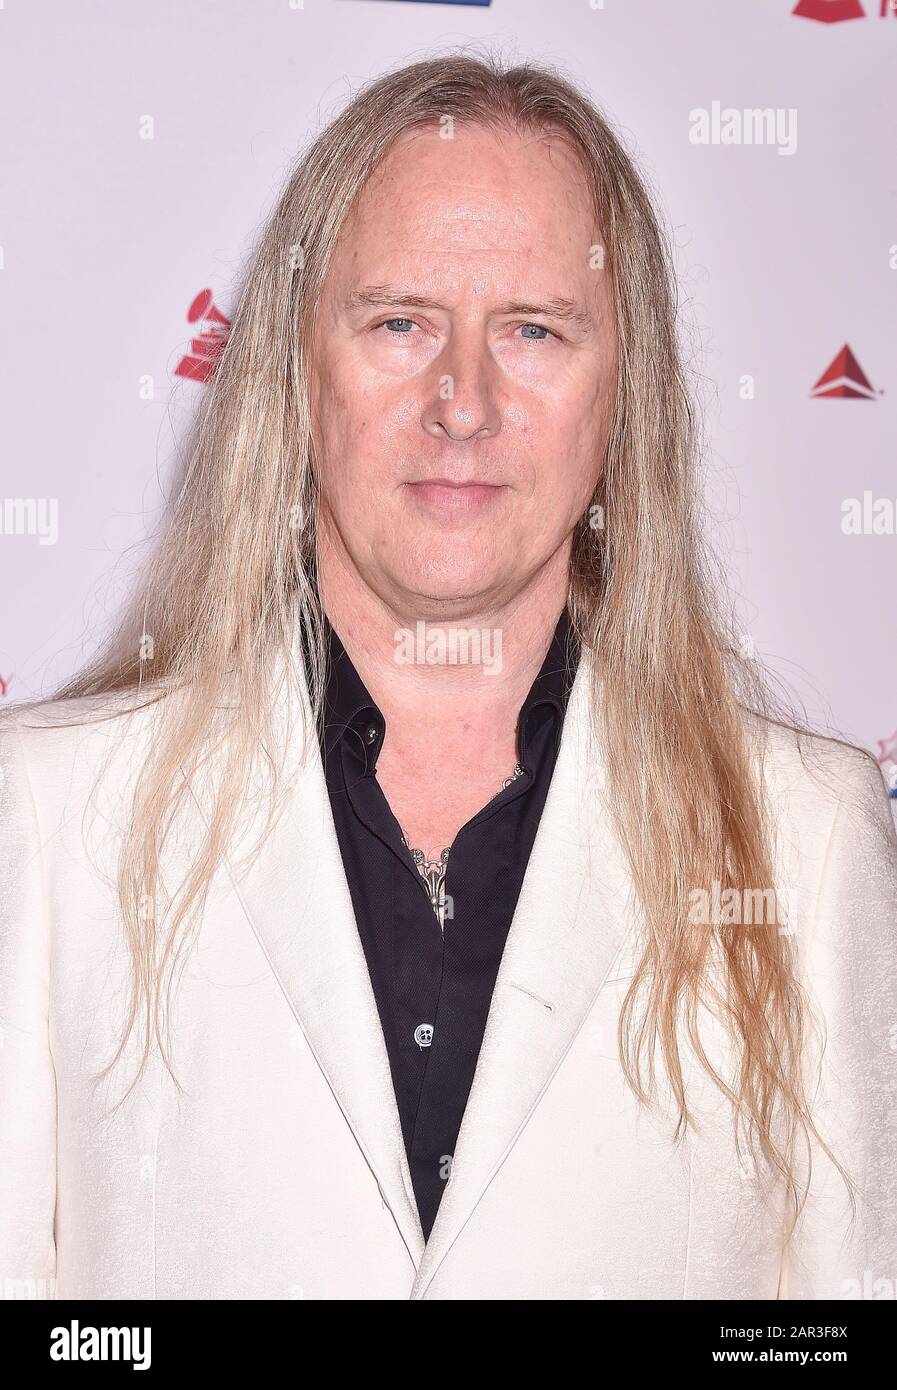 LOS ANGELES, CA - JANUARY 24: Jerry Cantrell of Alice In Chains attends the 2020 MusiCares Person Of The Year Honoring Aerosmith at West Hall At Los Angeles Convention Center on January 24, 2020 in Los Angeles, California. Stock Photo